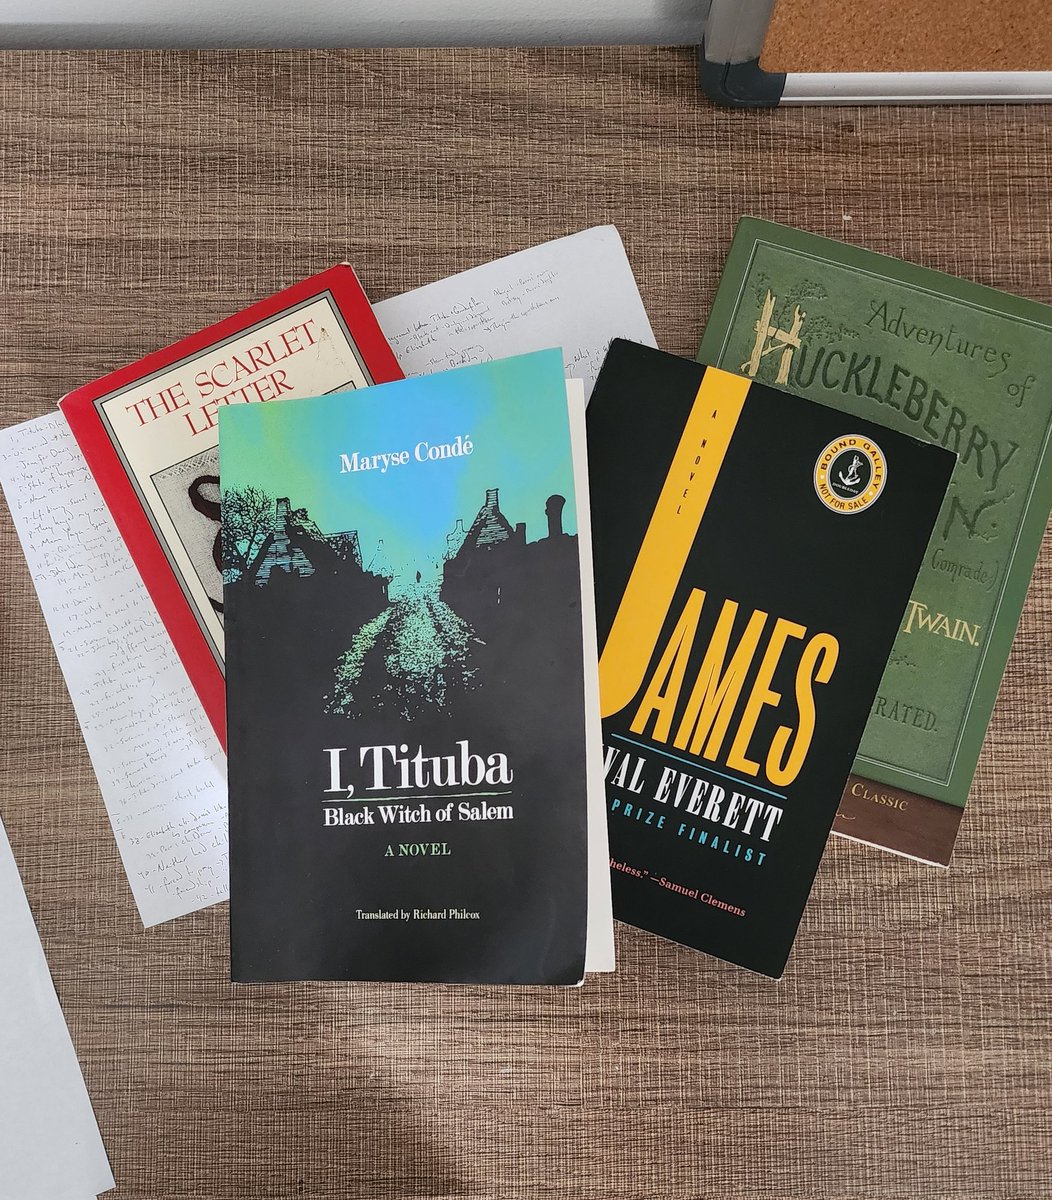 While Percival Everett's JAMES is getting the love it deserves, I want to highlight another stellar literary revision: Maryse Condé's, I, TITUBA: BLACK WITCH OF SALEM. It is to THE CRUCIBLE and THE SCARLET LETTER what JAMES is to HUCK FINN. Condé shares Everett's wicked wit, too